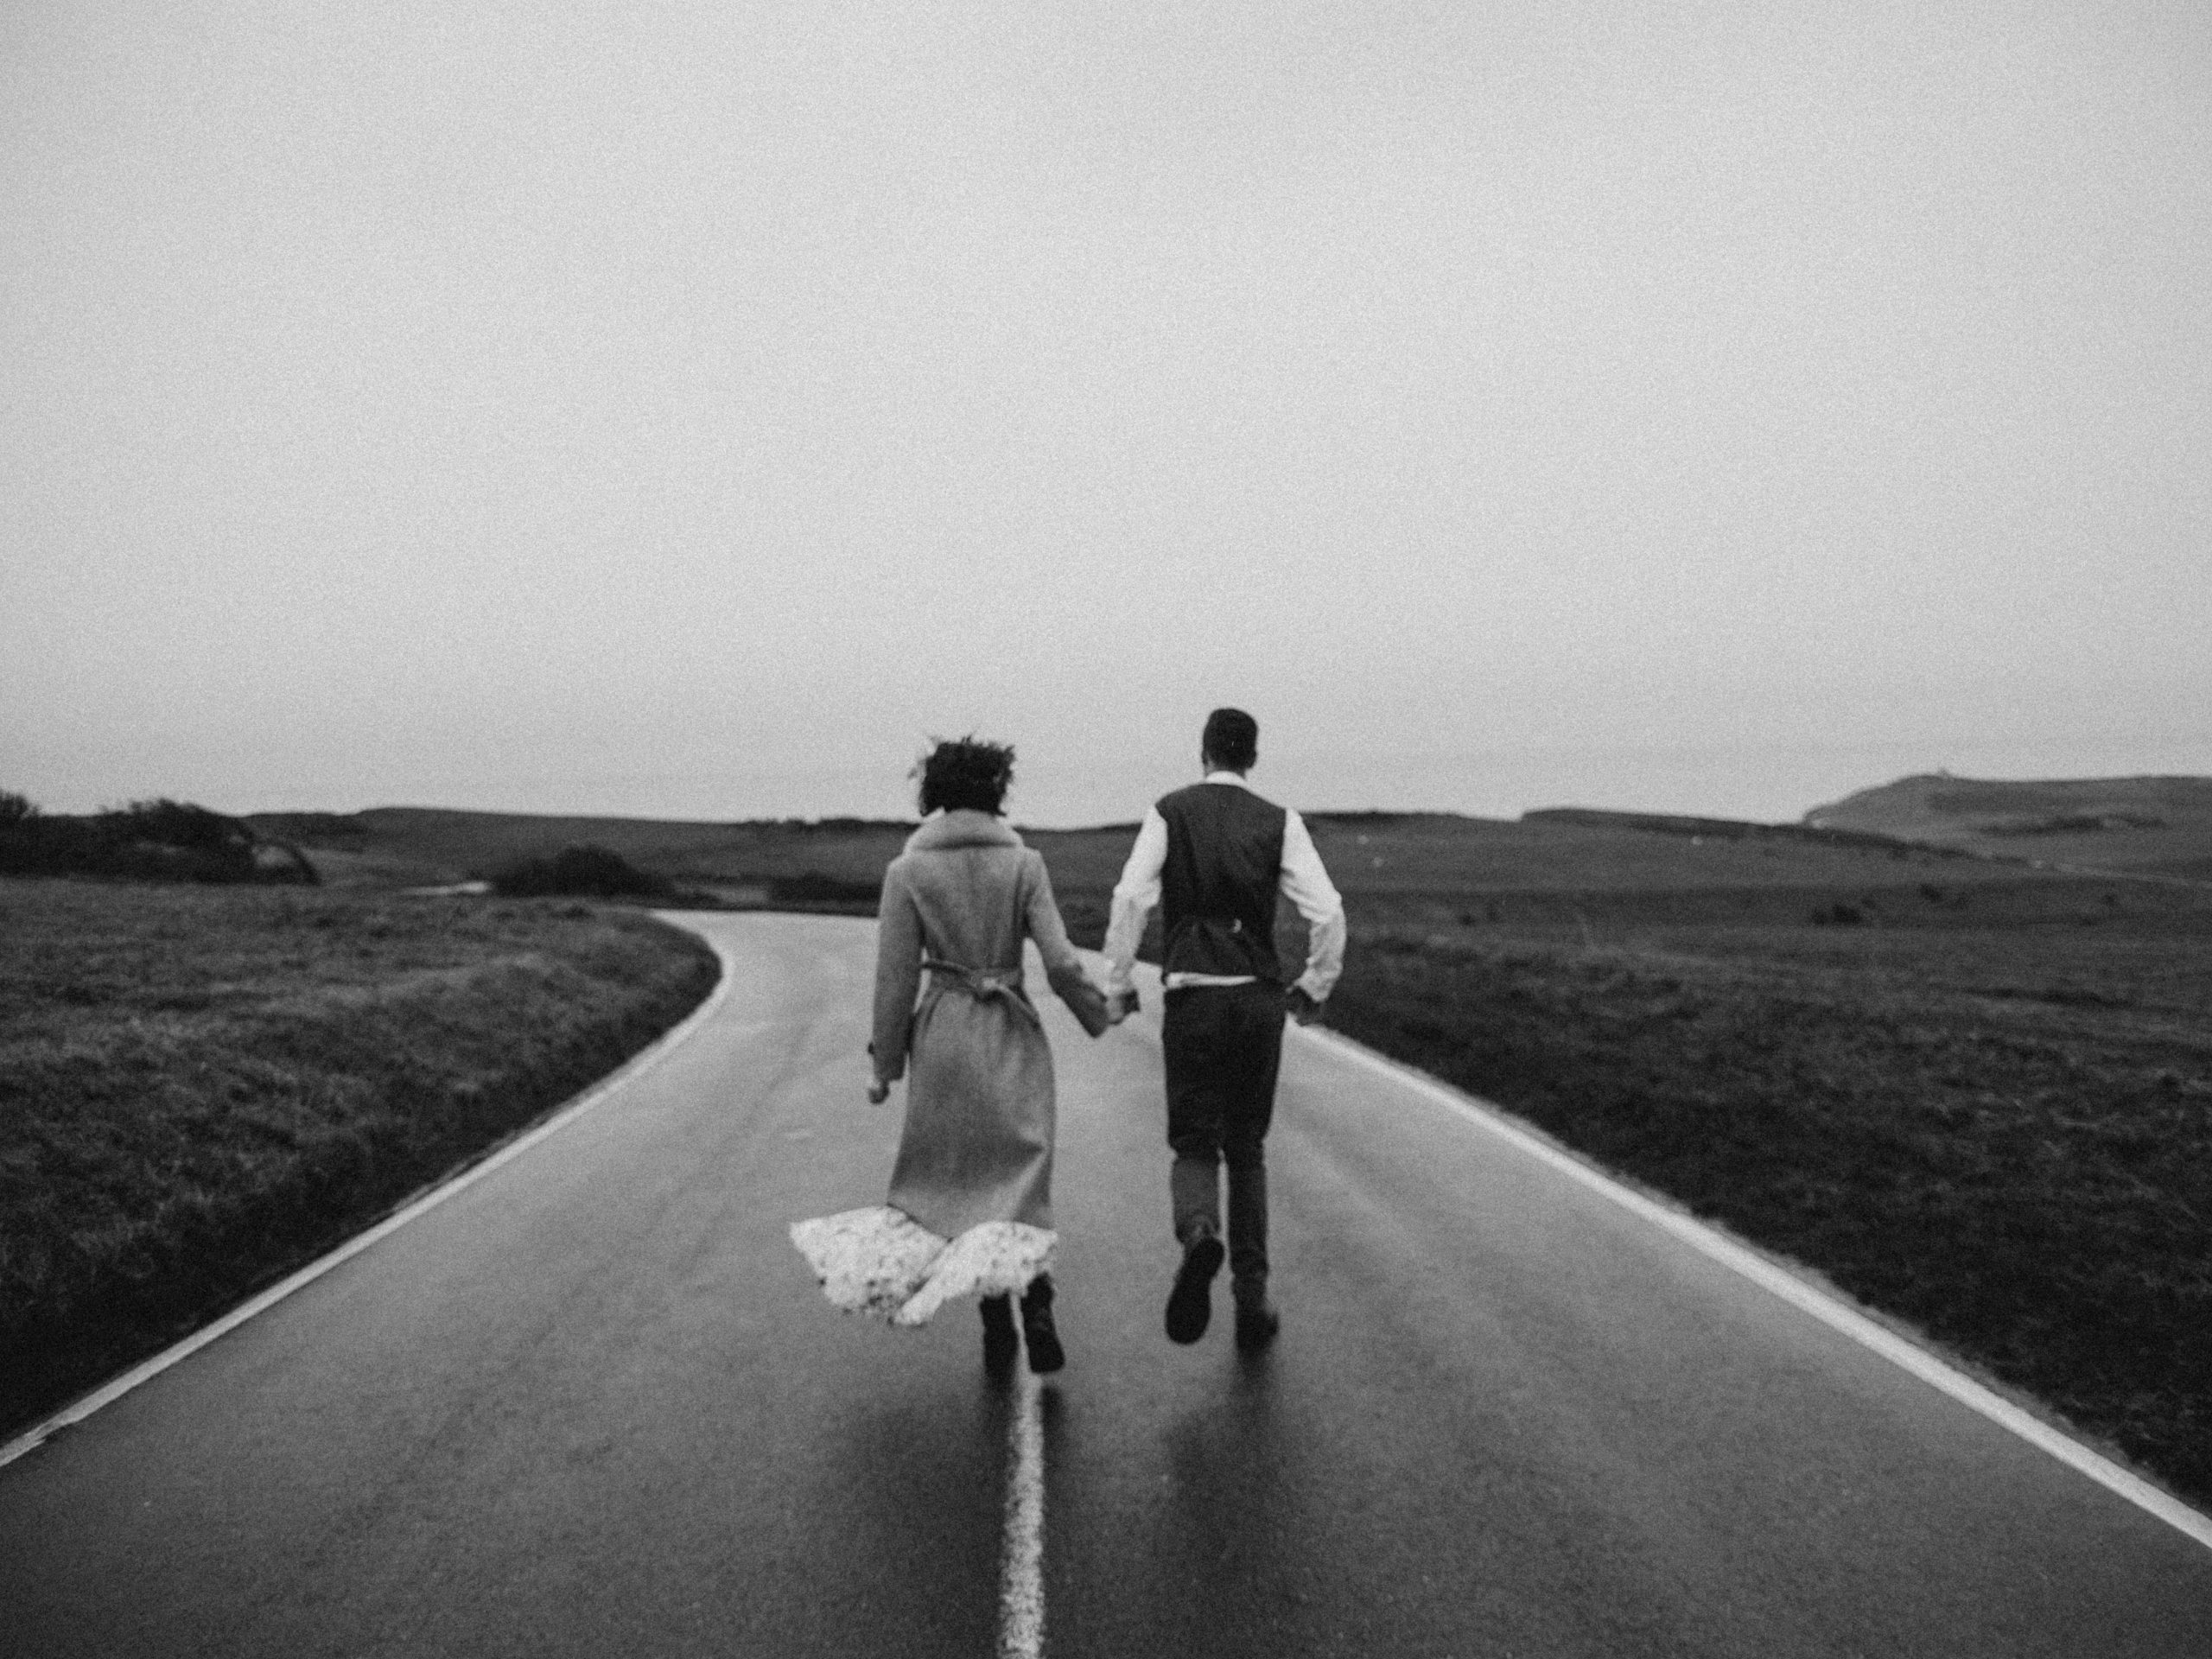 A couple walking on the road